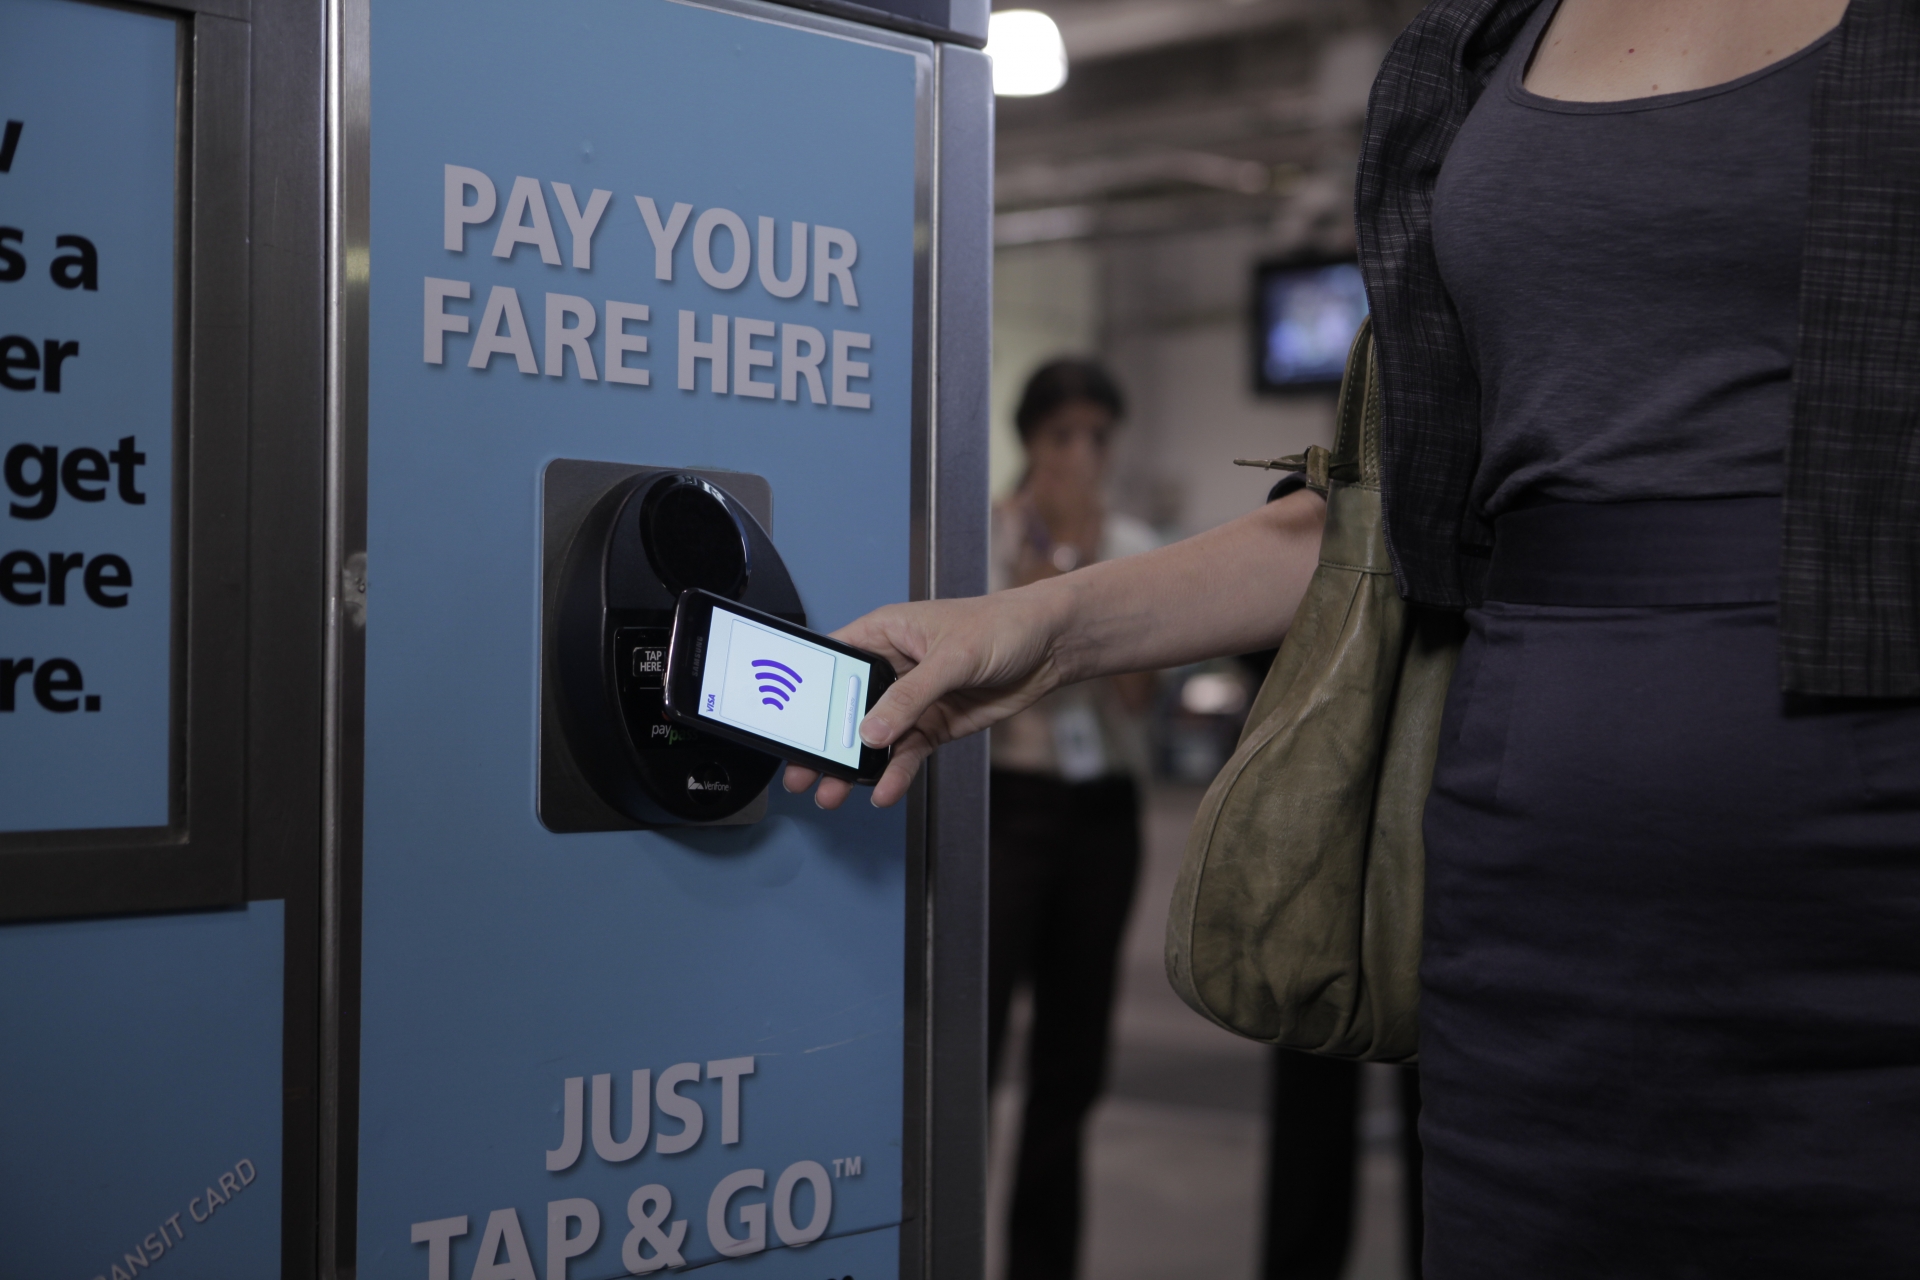 Payment is critical to improve commute experience, study finds